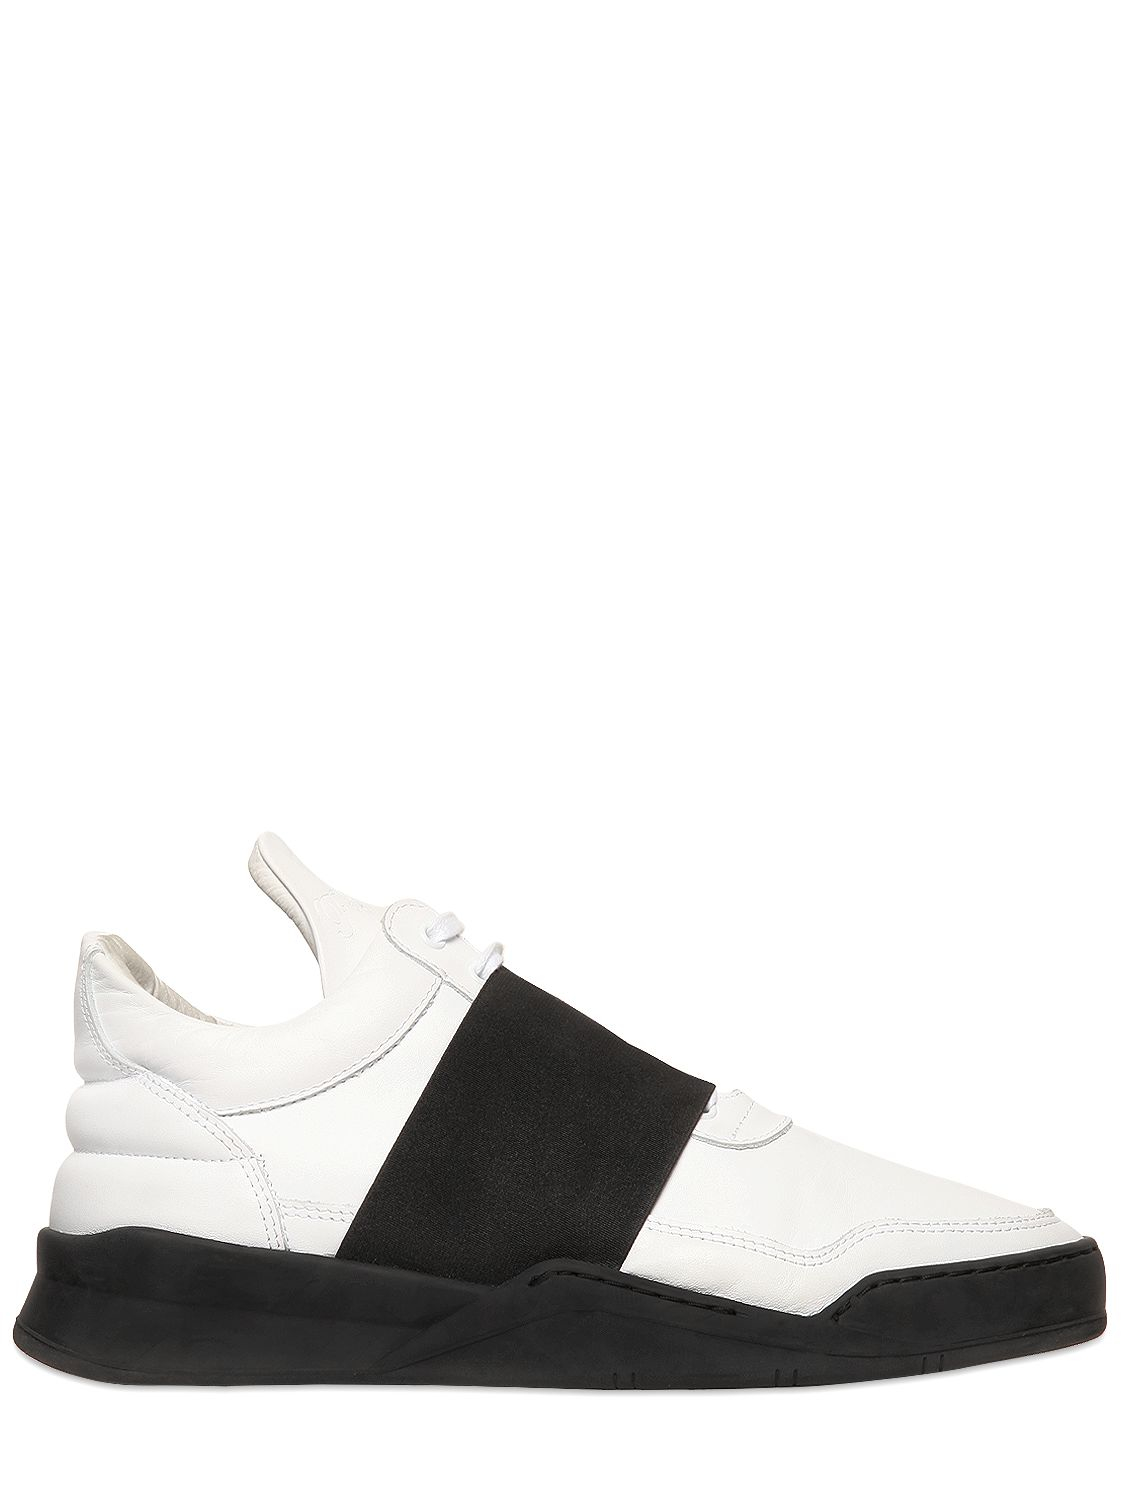 Filling Pieces Elastic Band Leather Sneakers in White/Black (Black) for Men  - Lyst